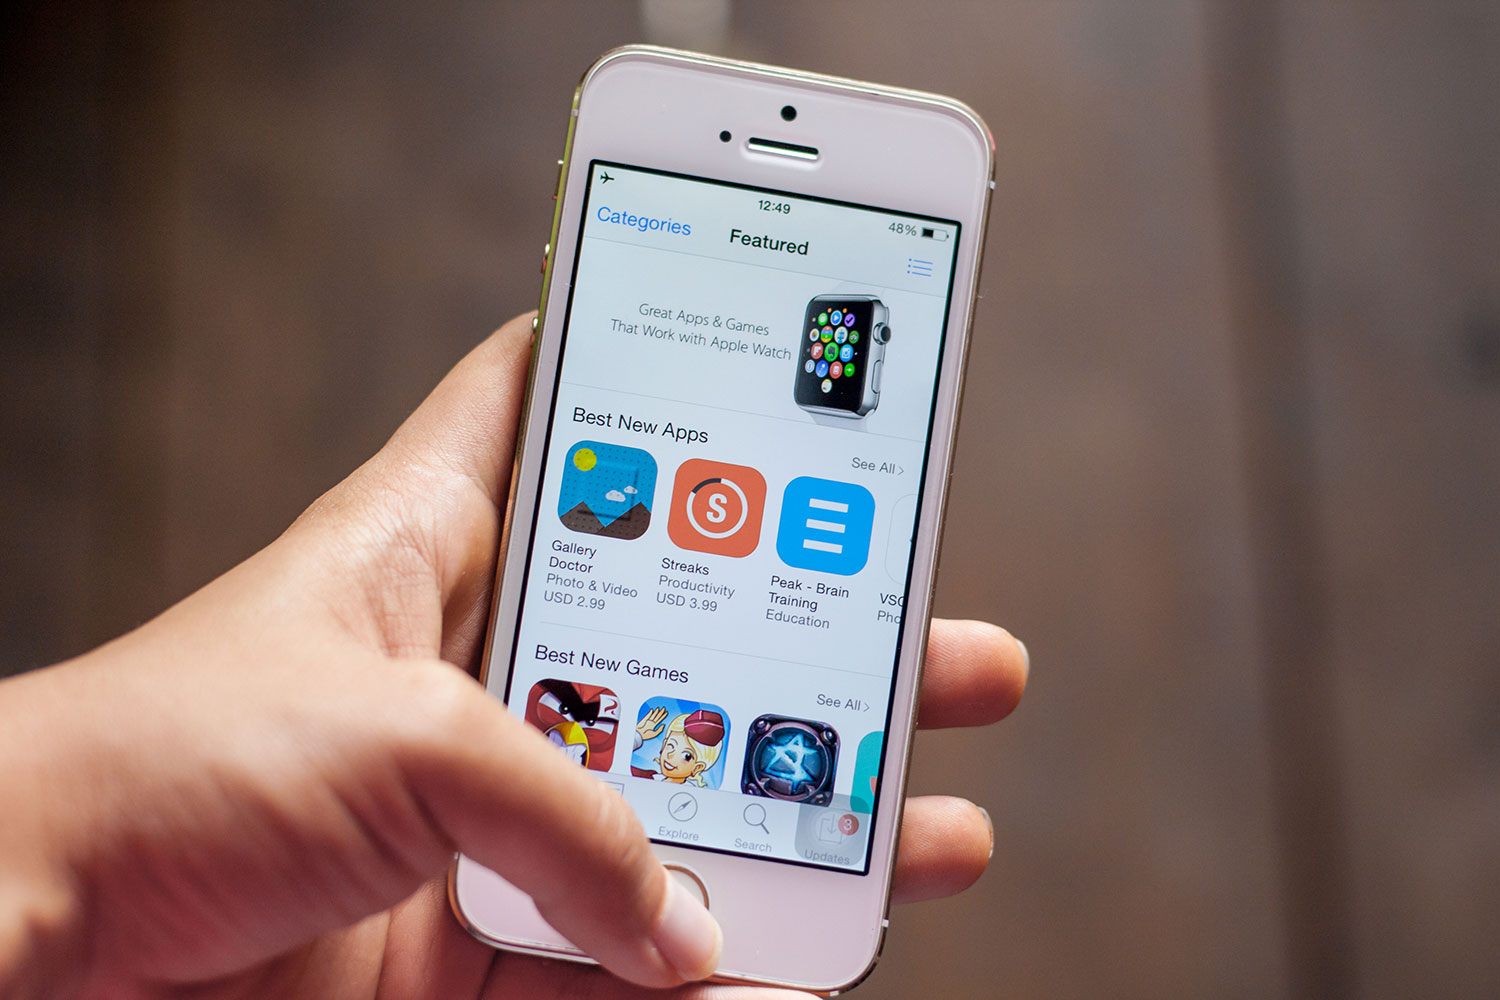 The Highest Rated iOS Apps and Games of All Time, According to App